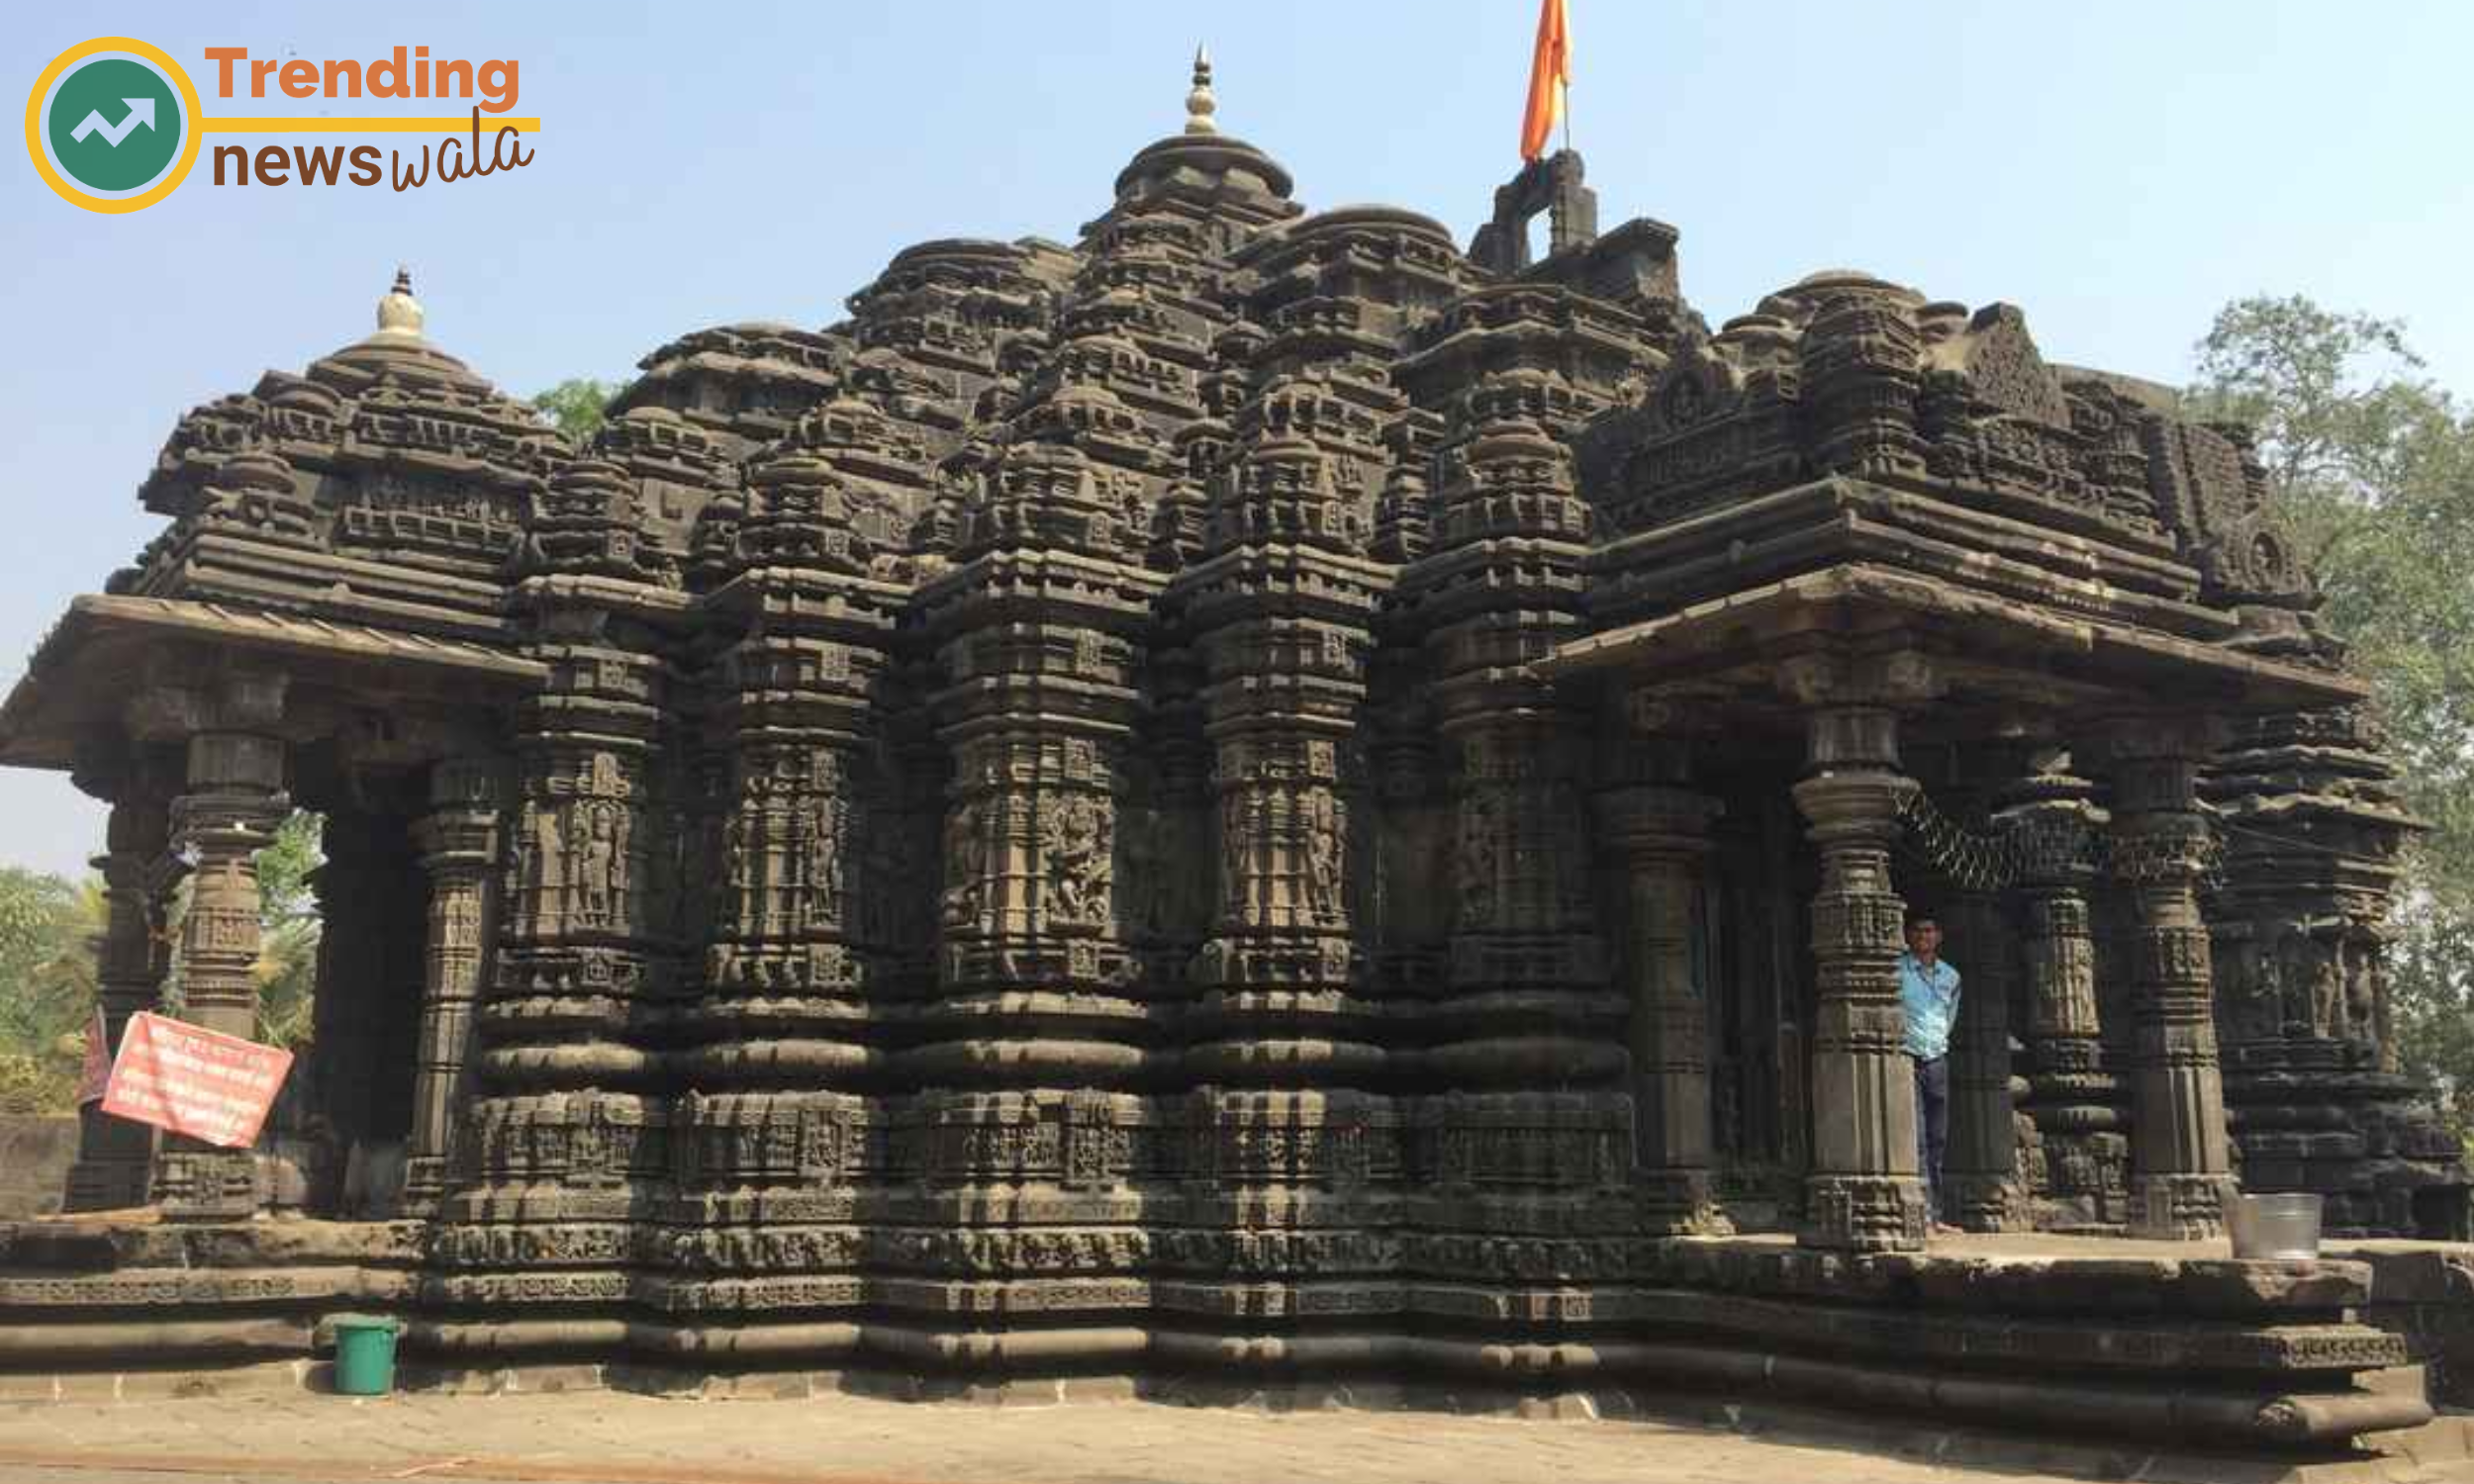 The Ambernath Shiva Temple has a rich historical legacy